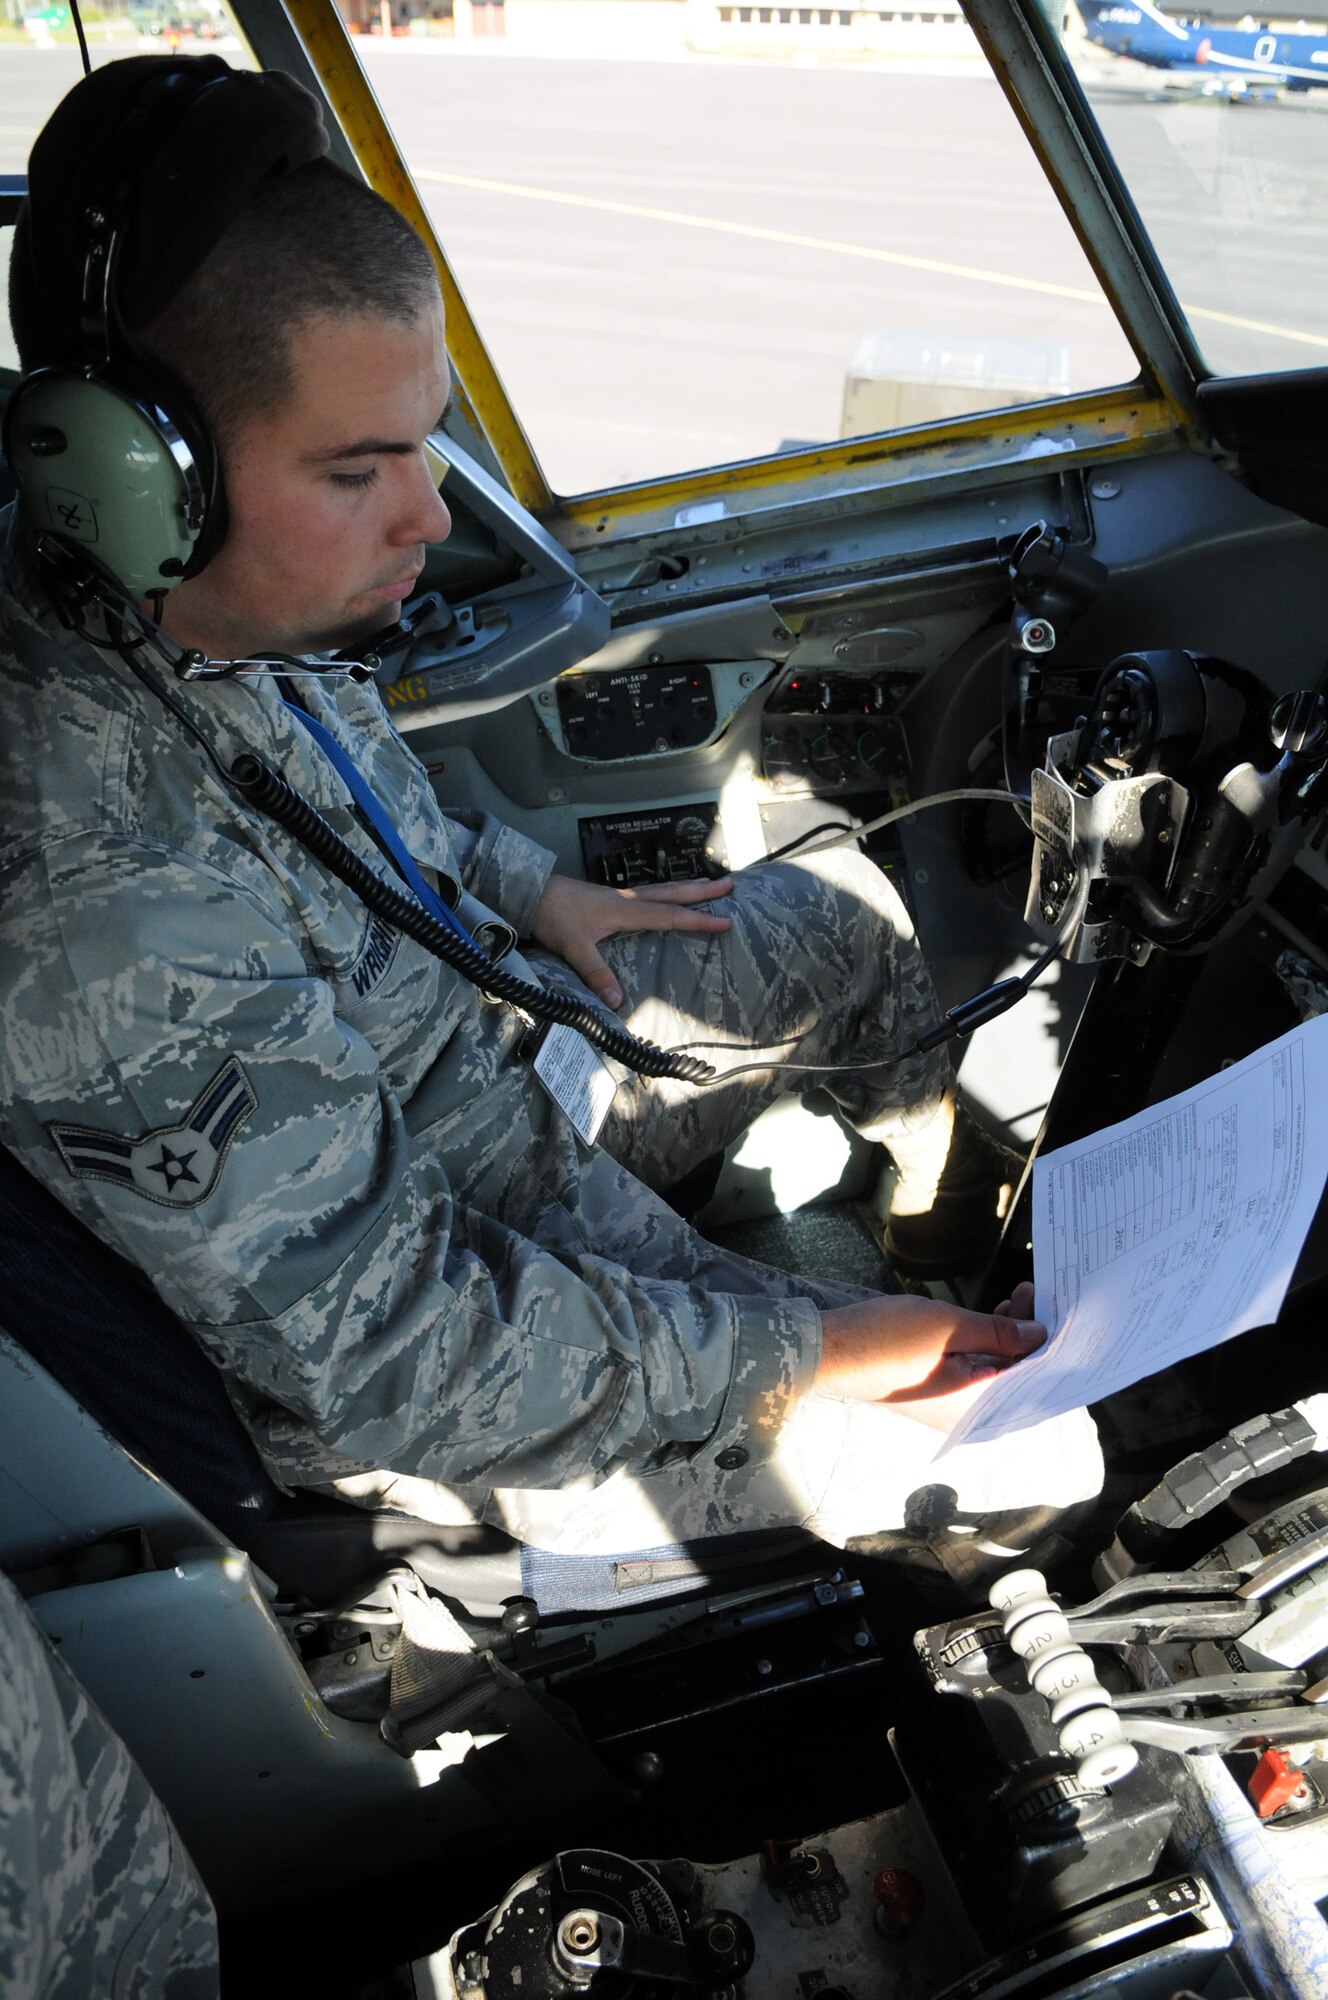 Airman 1st Class Josh Wright, 100th Aircraft Maintenance Squadron, performs pre-flight checks aboard a 100th Air Refueling Wing KC-135 before the first mission of Loyal Arrow 2009 in Lulea, Sweden.  Loyal Arrow is an exercise in Sweden involving more than 10 countries and 1,000 military members.  (U.S. Air Force photo by Staff Sgt. Austin M. May)  